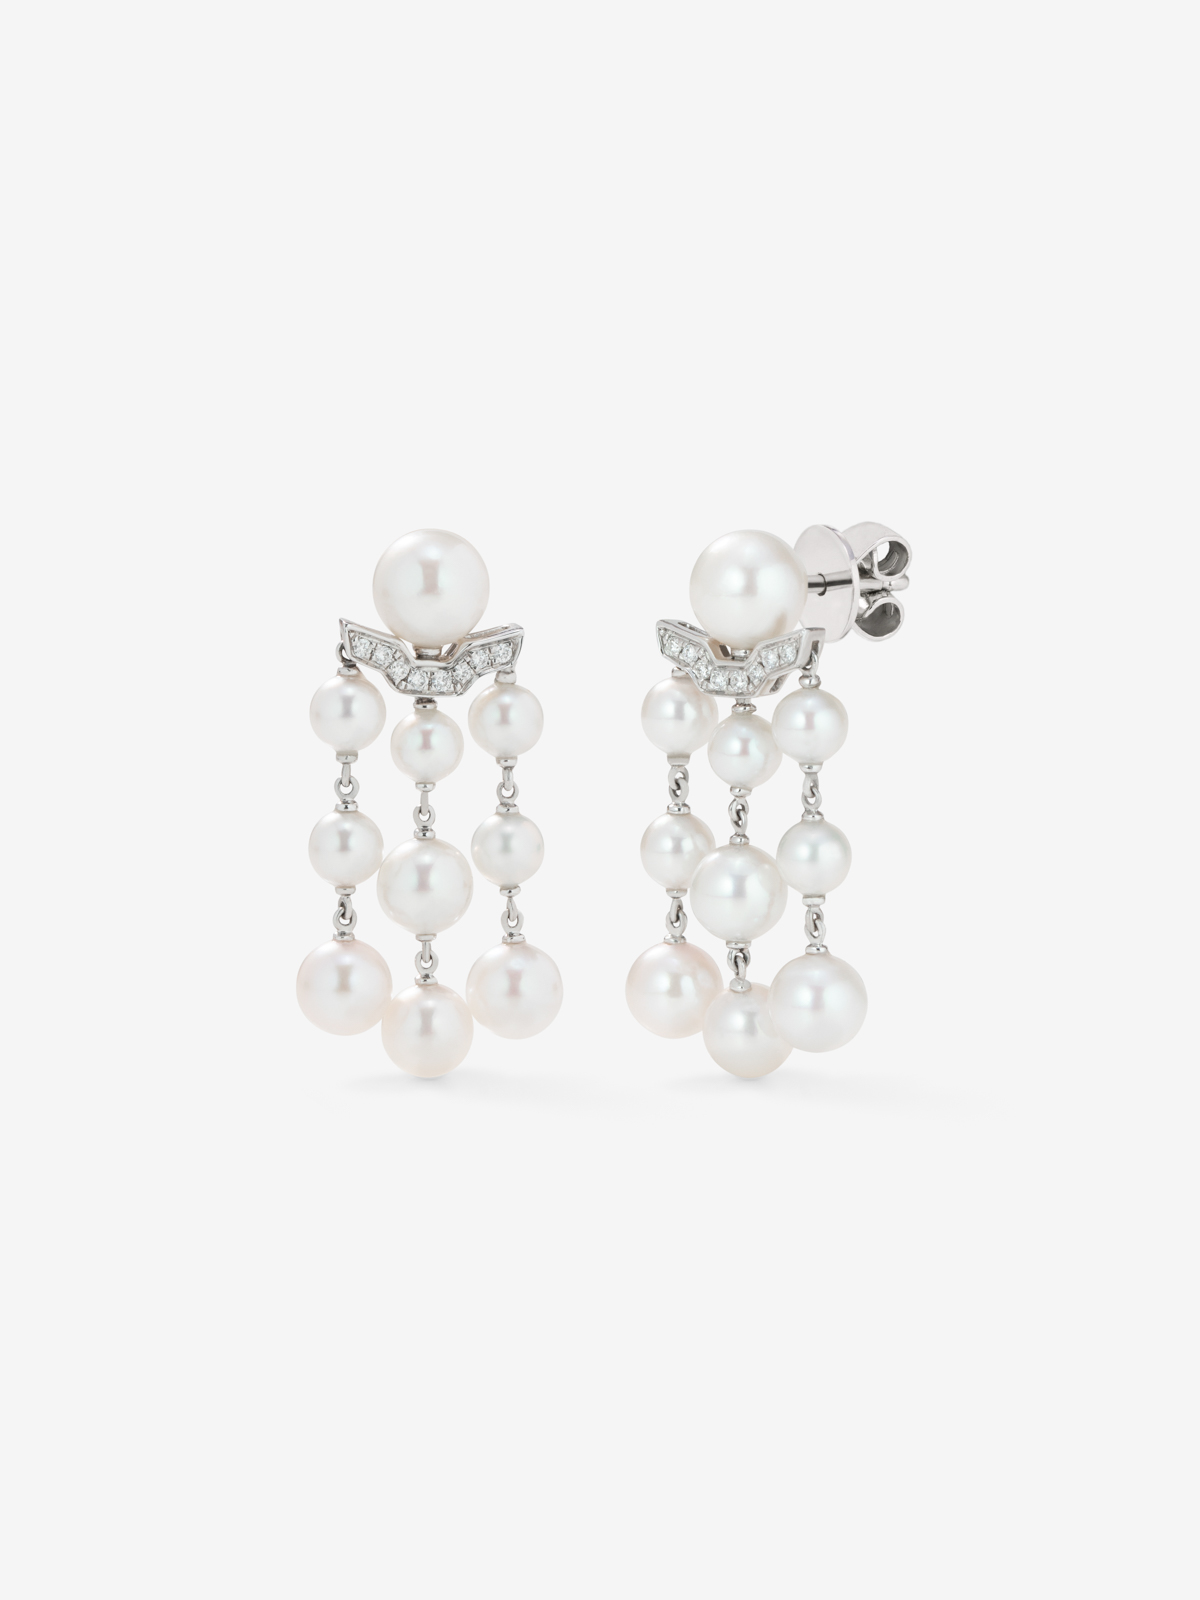 18k white gold earrings with Akoya pearls and diamonds.